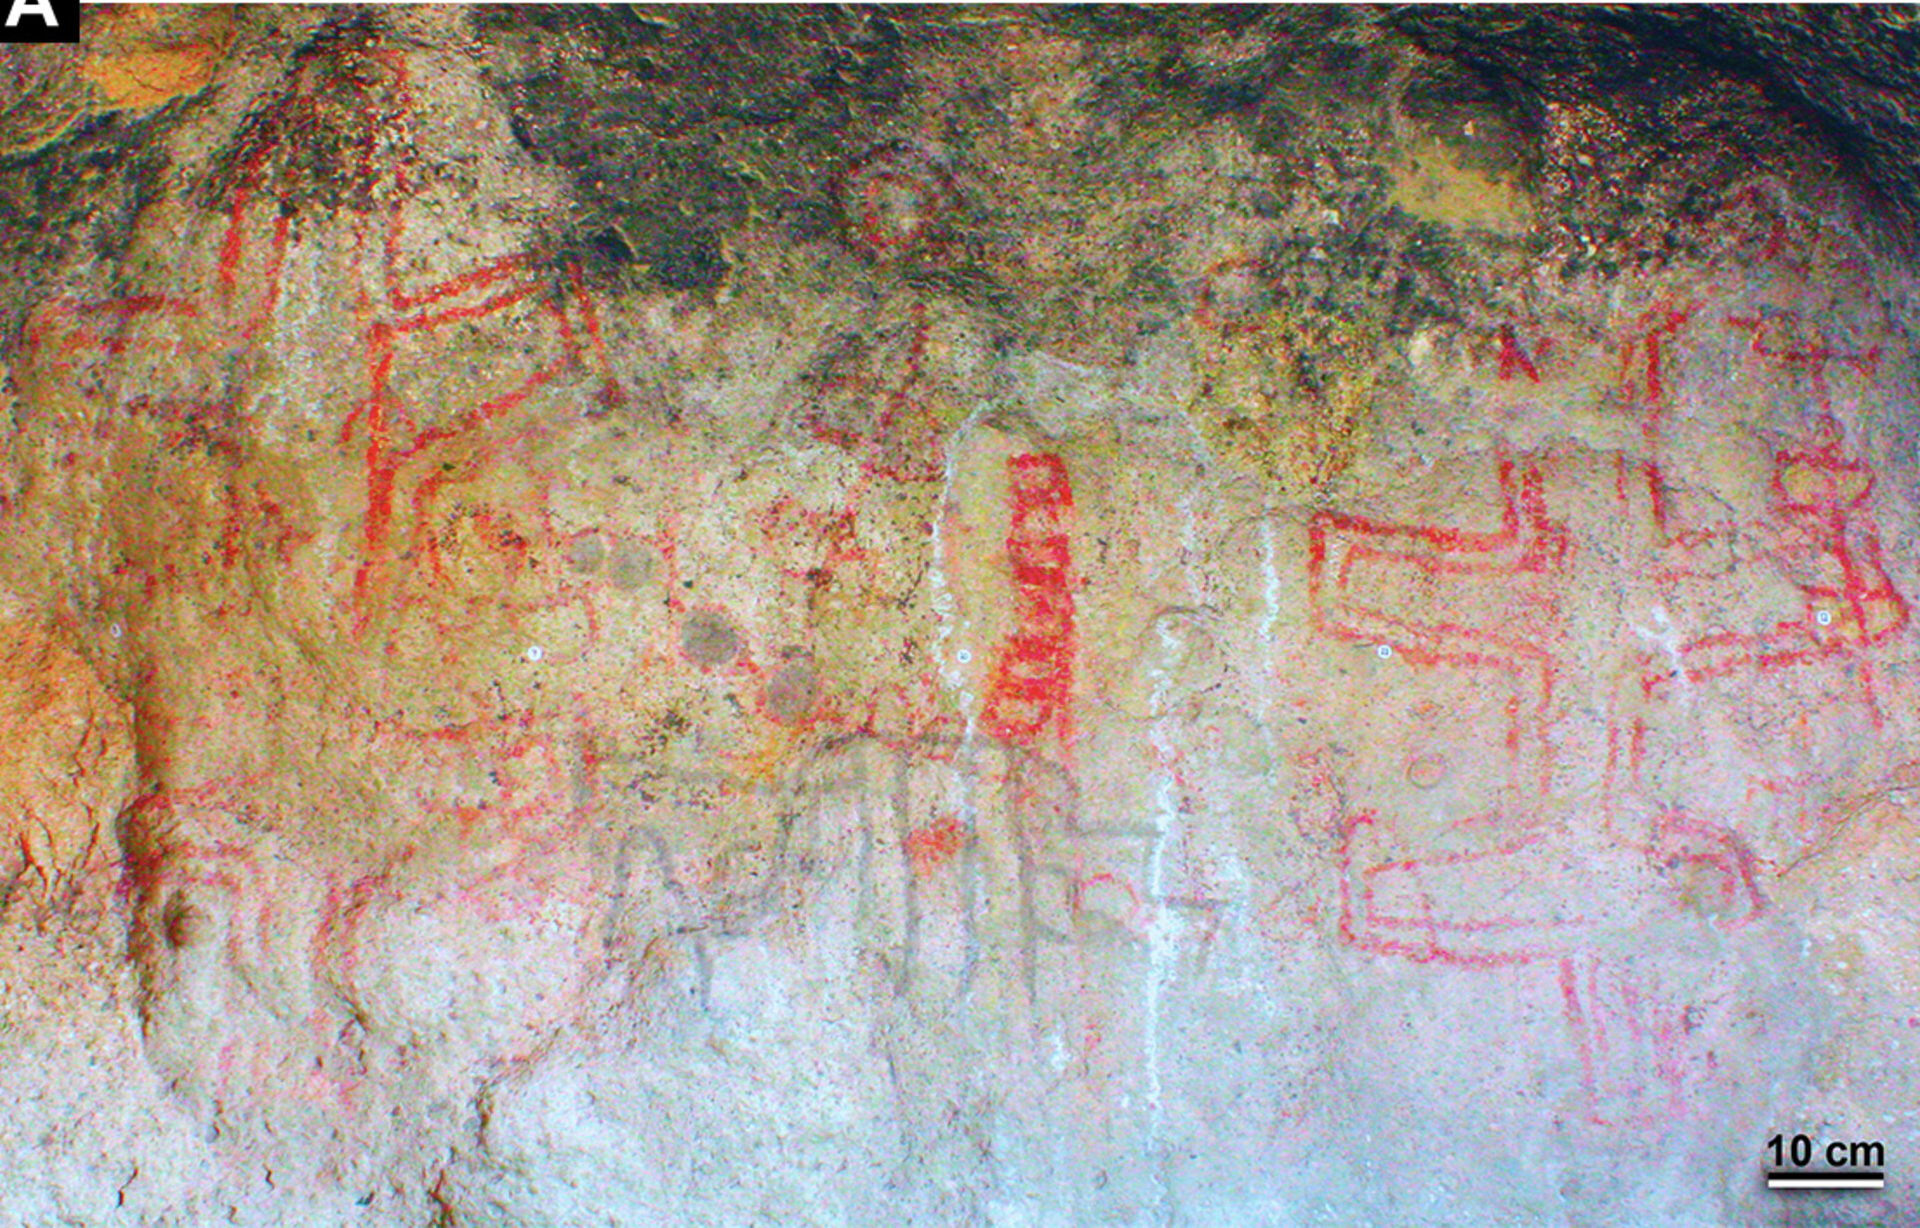 What did the cave art portray?